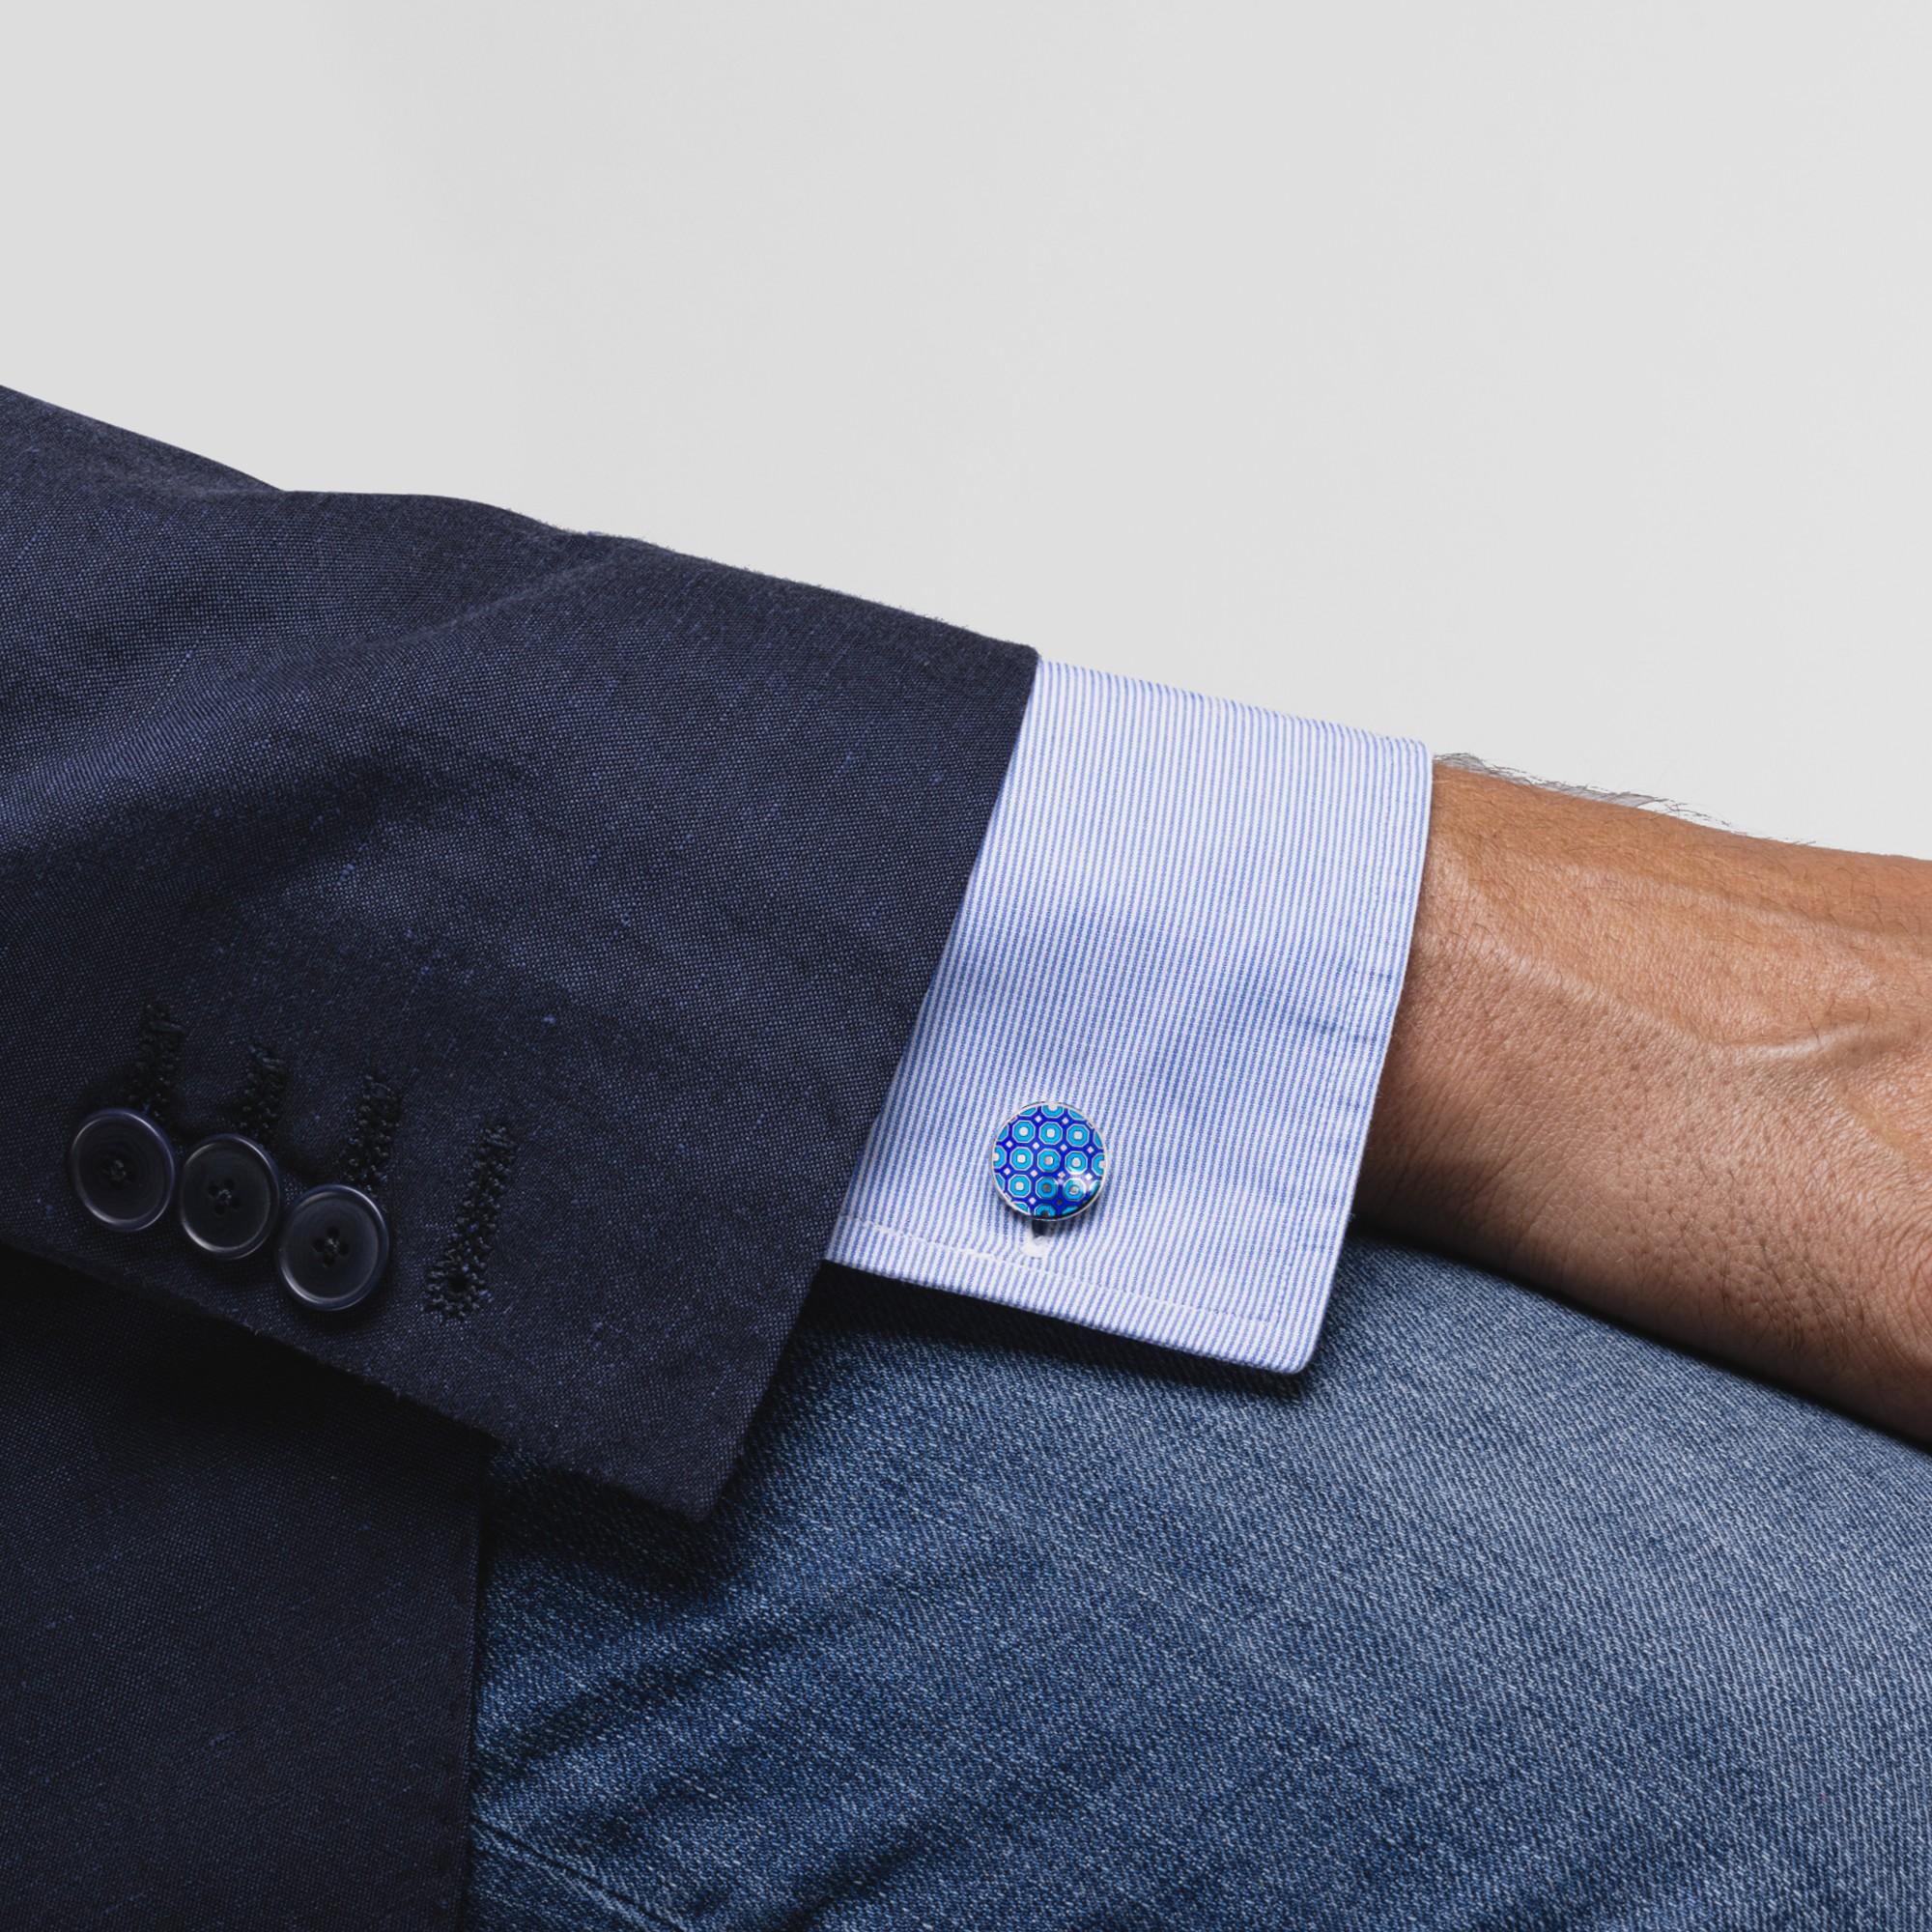 Alex Jona design collection, hand crafted in Italy, rhodium plated Sterling Silver cufflinks with blue enamel. These cufflinks feature a T-Bar fastening, aiding in easy use and confidence that they'll stay secured to your shirt. Dimensions: 